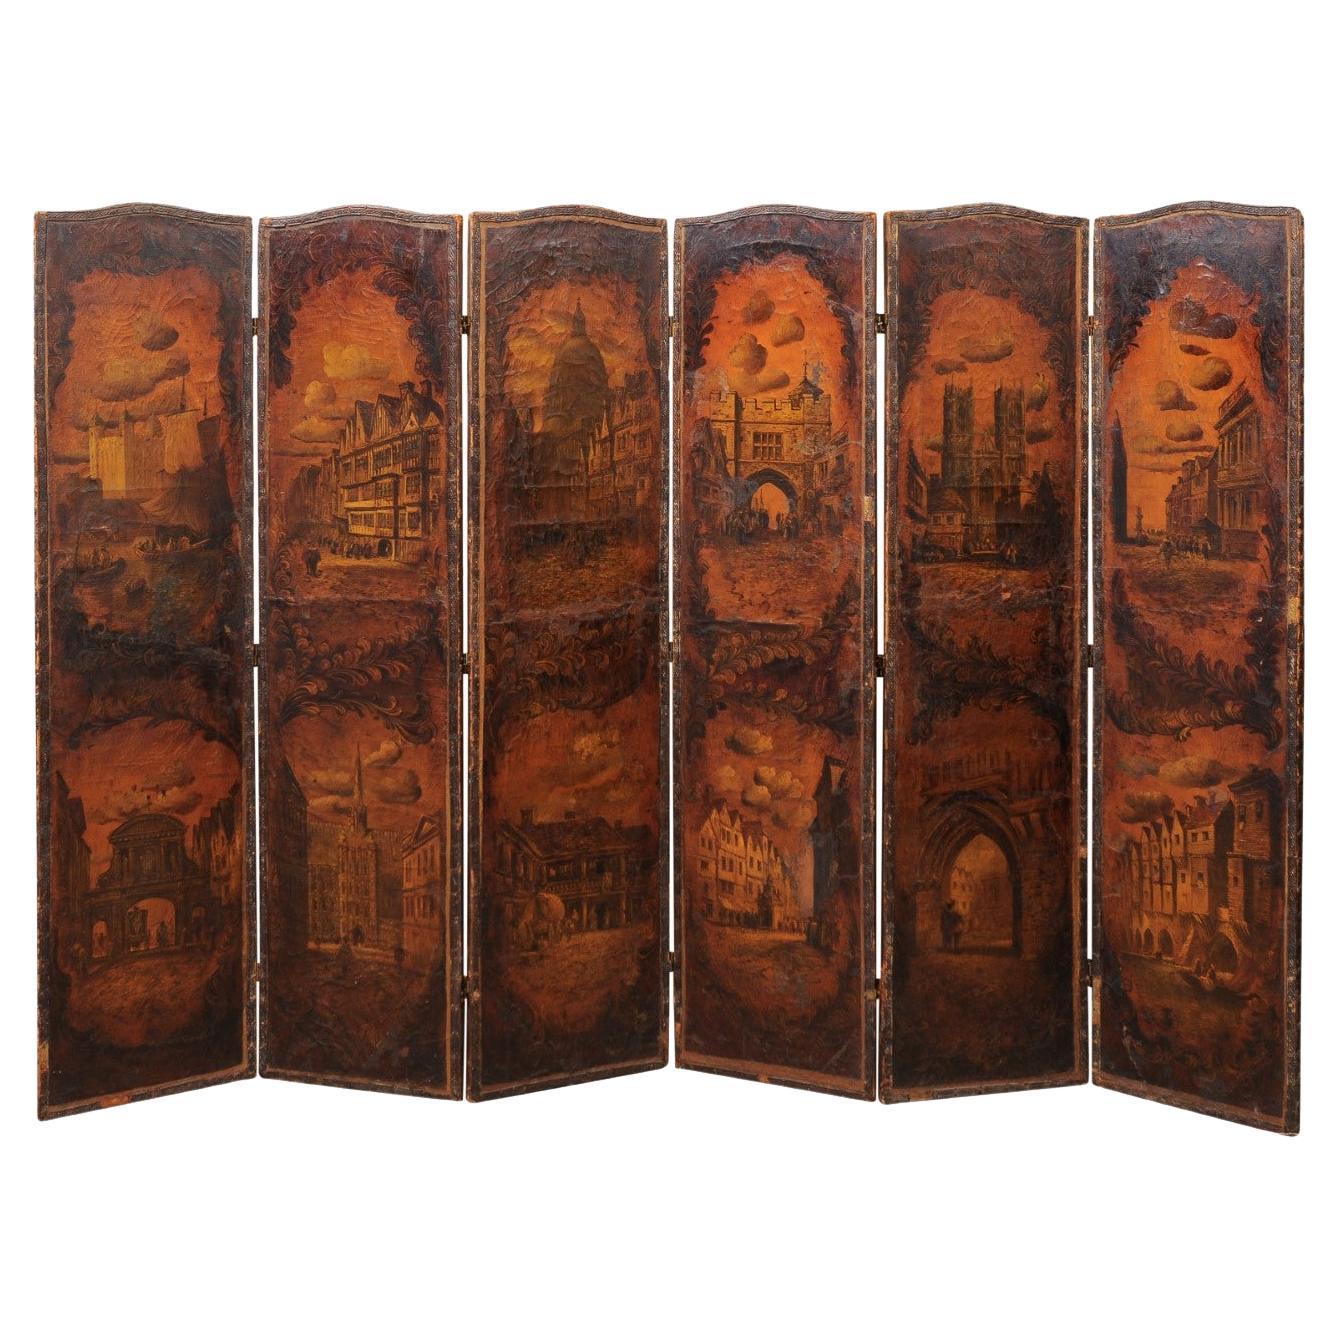  Large Continental 6 Panel Leather Screen with Architectural Landscape Design  For Sale